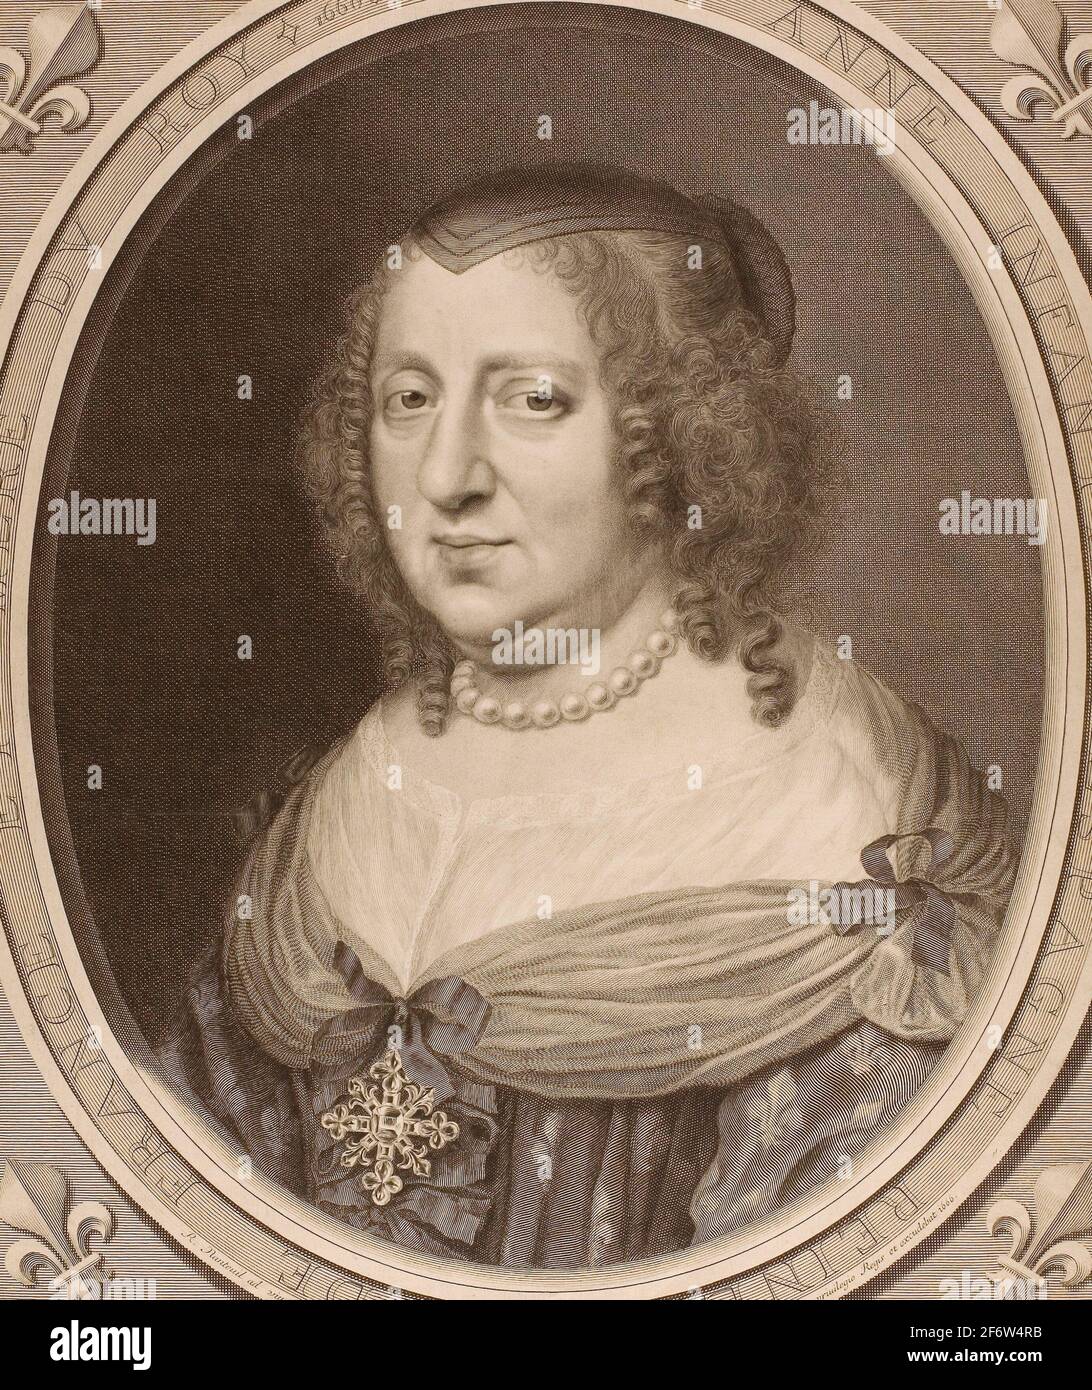 Author: Robert Nanteuil. Anne of Austria - 1666 - Robert Nanteuil French, 1623-1678. Engraving on paper. France. Stock Photo